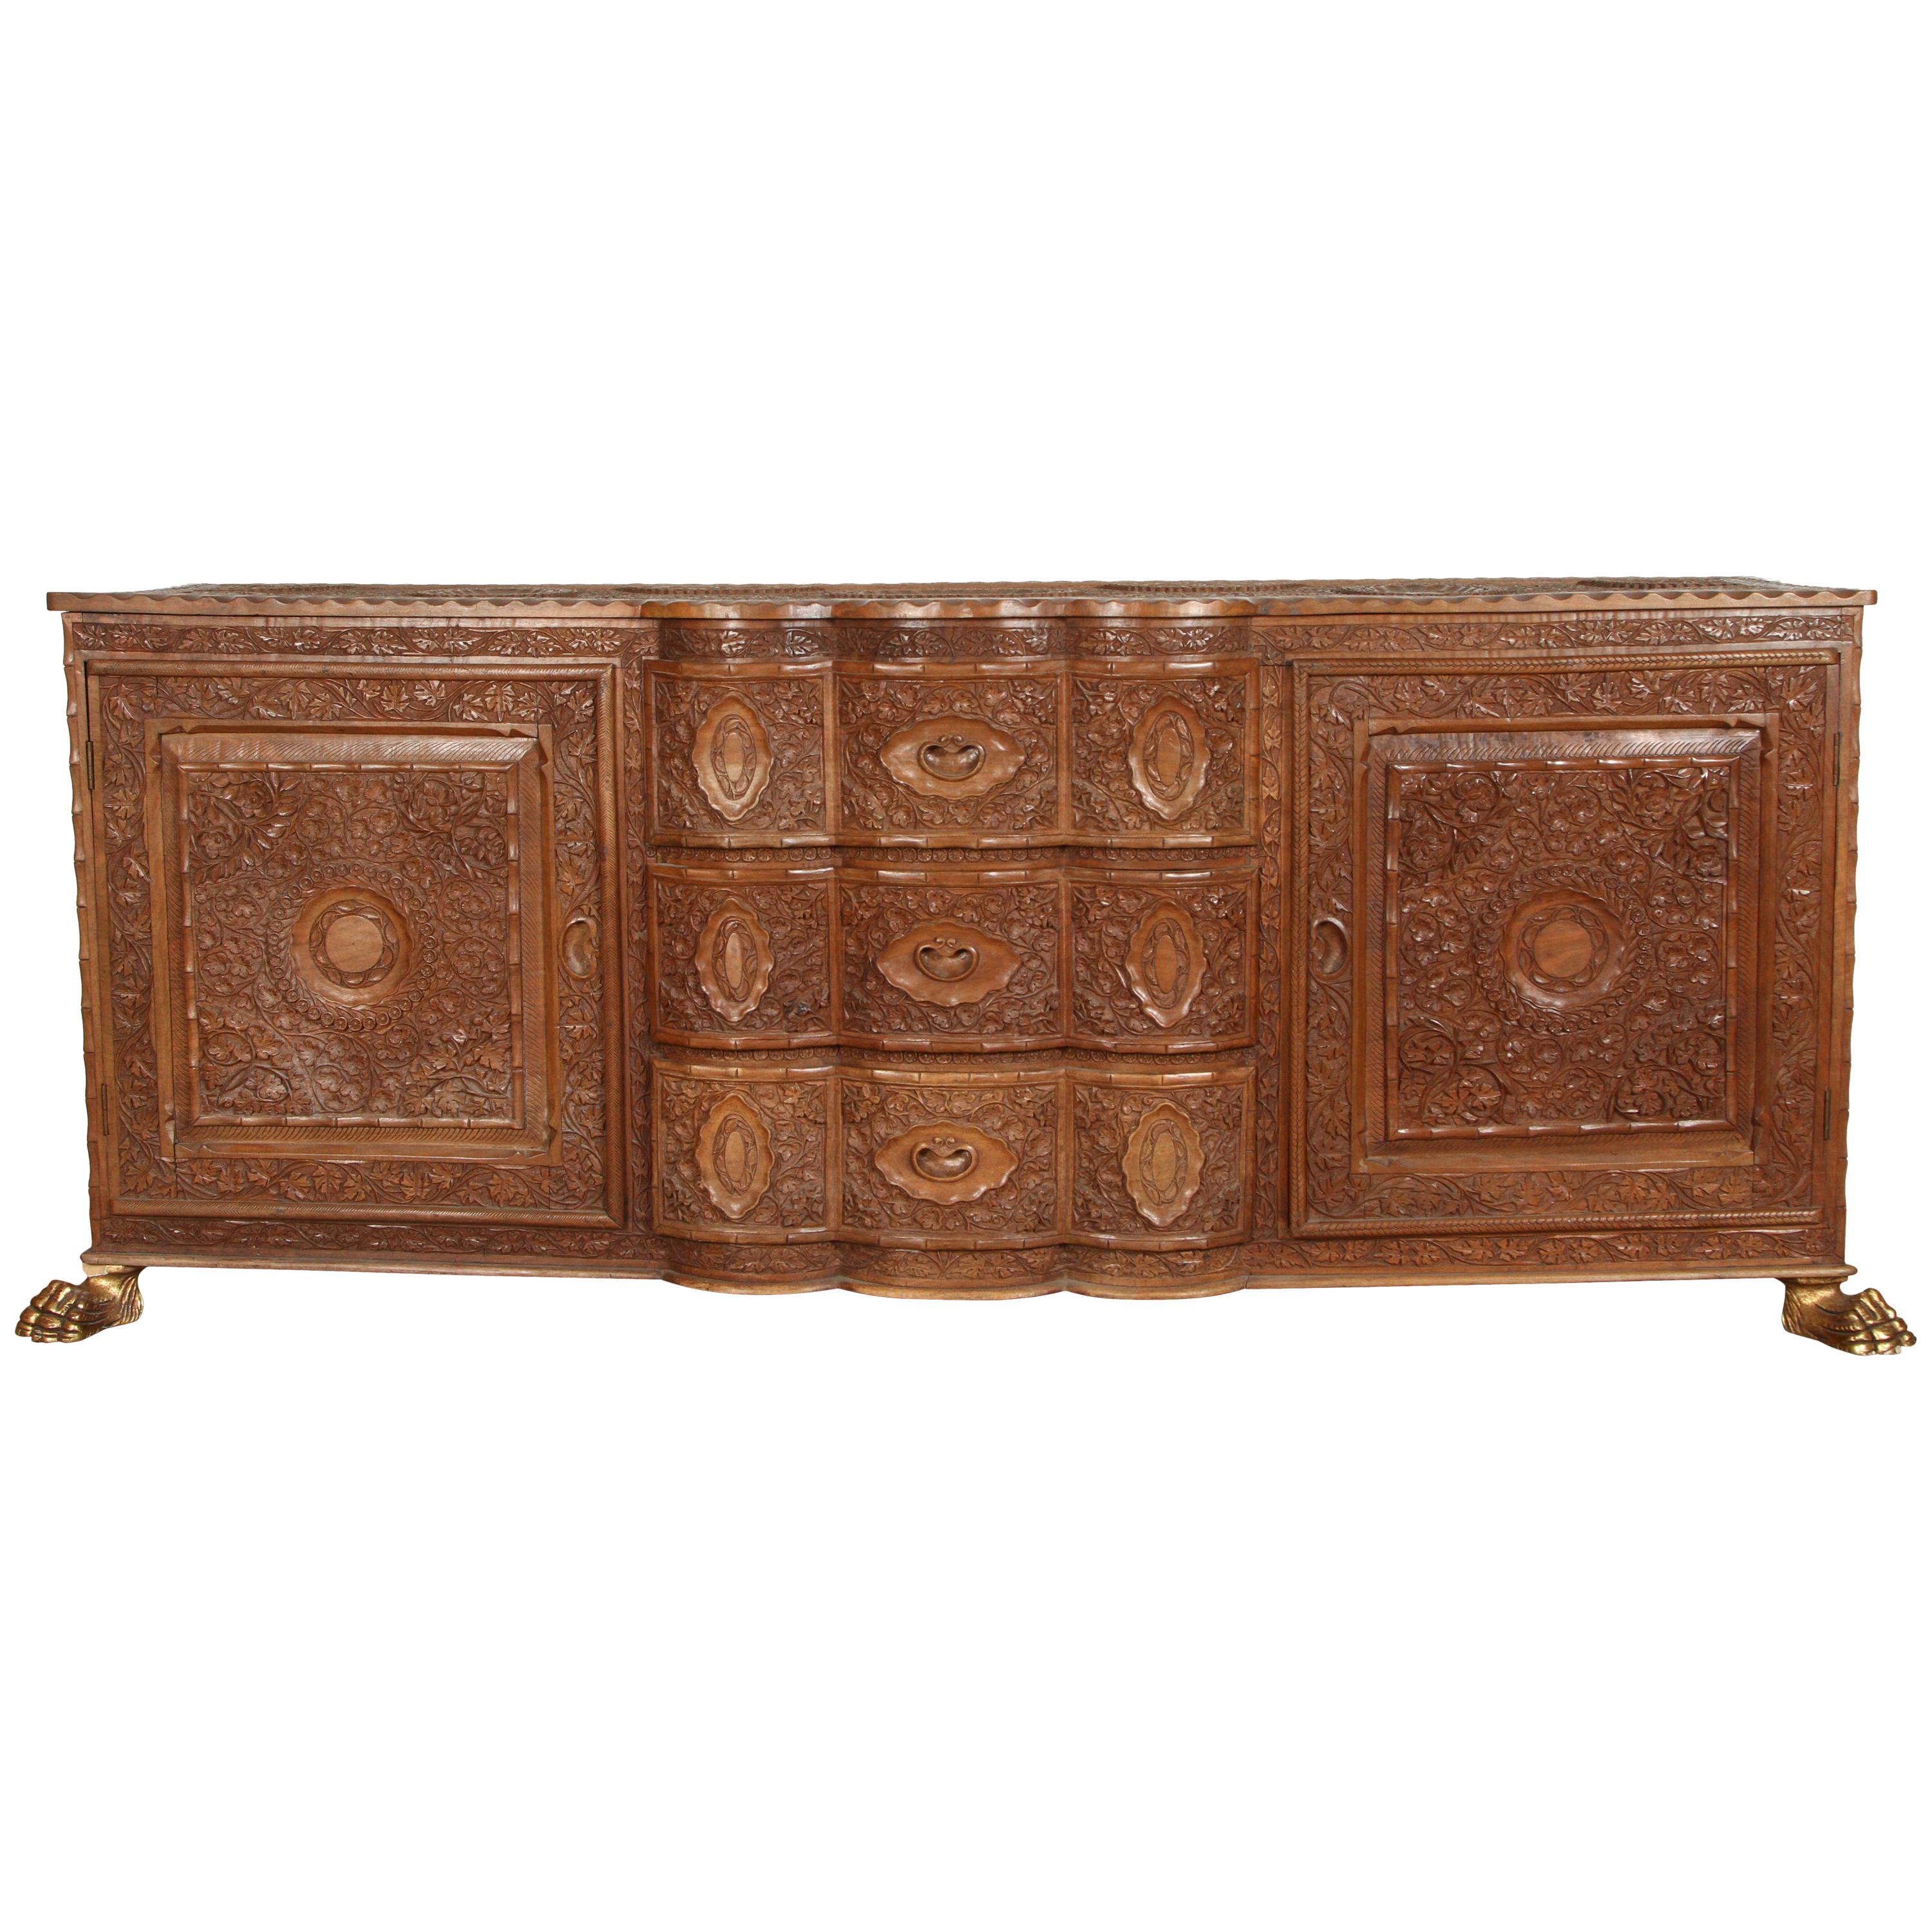 Asian Finely Hand Carved Sideboard from Java, Indonesia